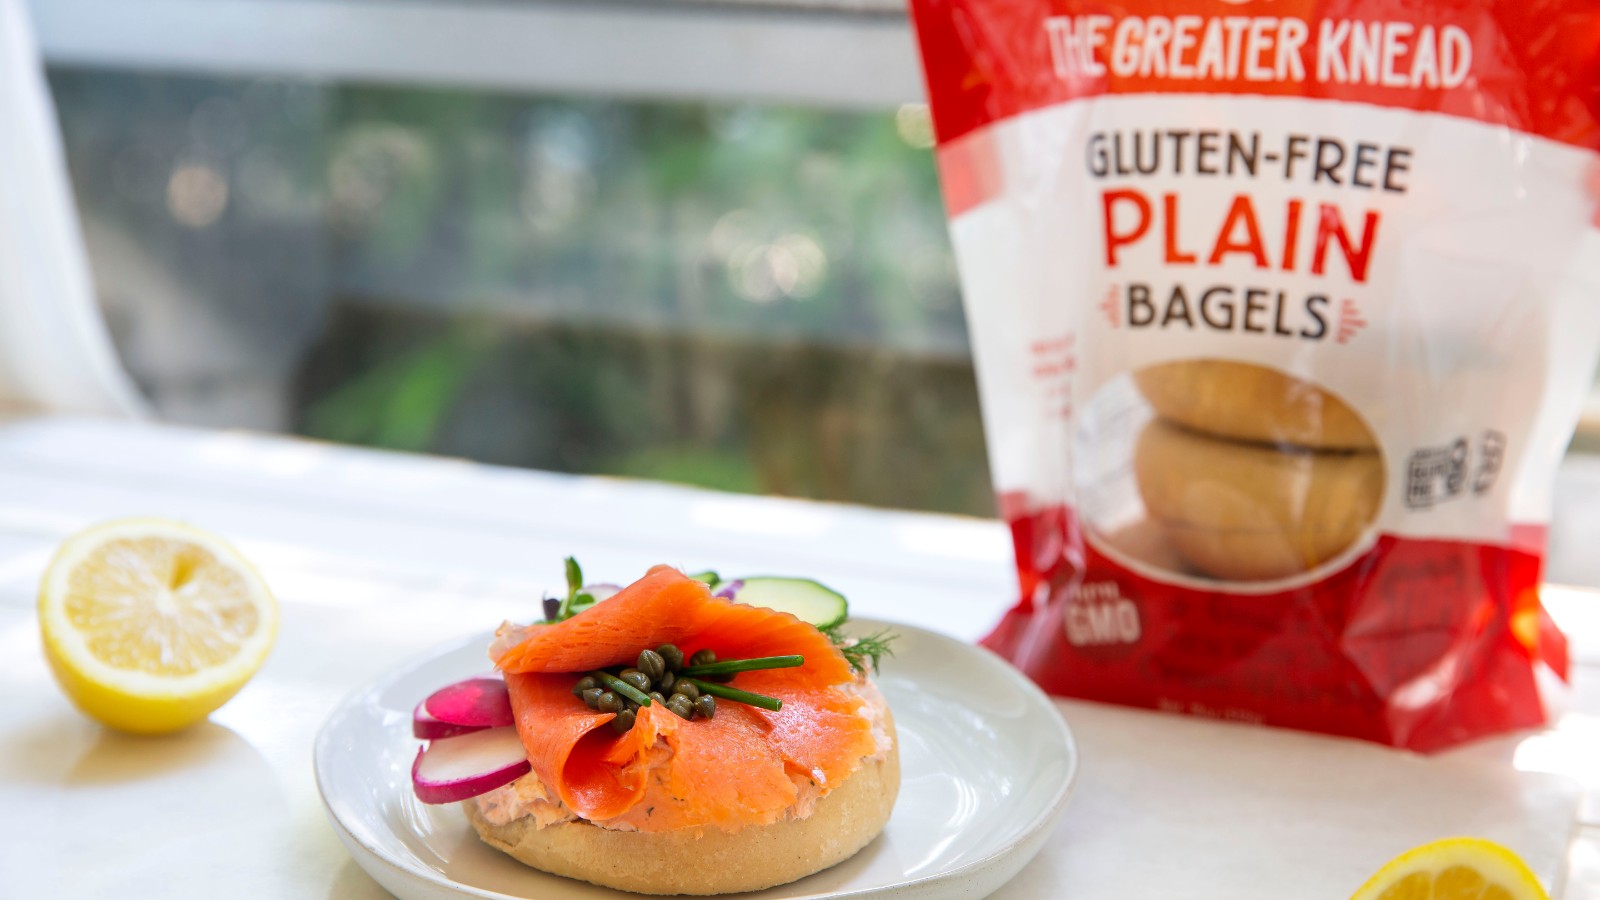 Image of Gluten Free Bagels with Smoked Salmon Schmear